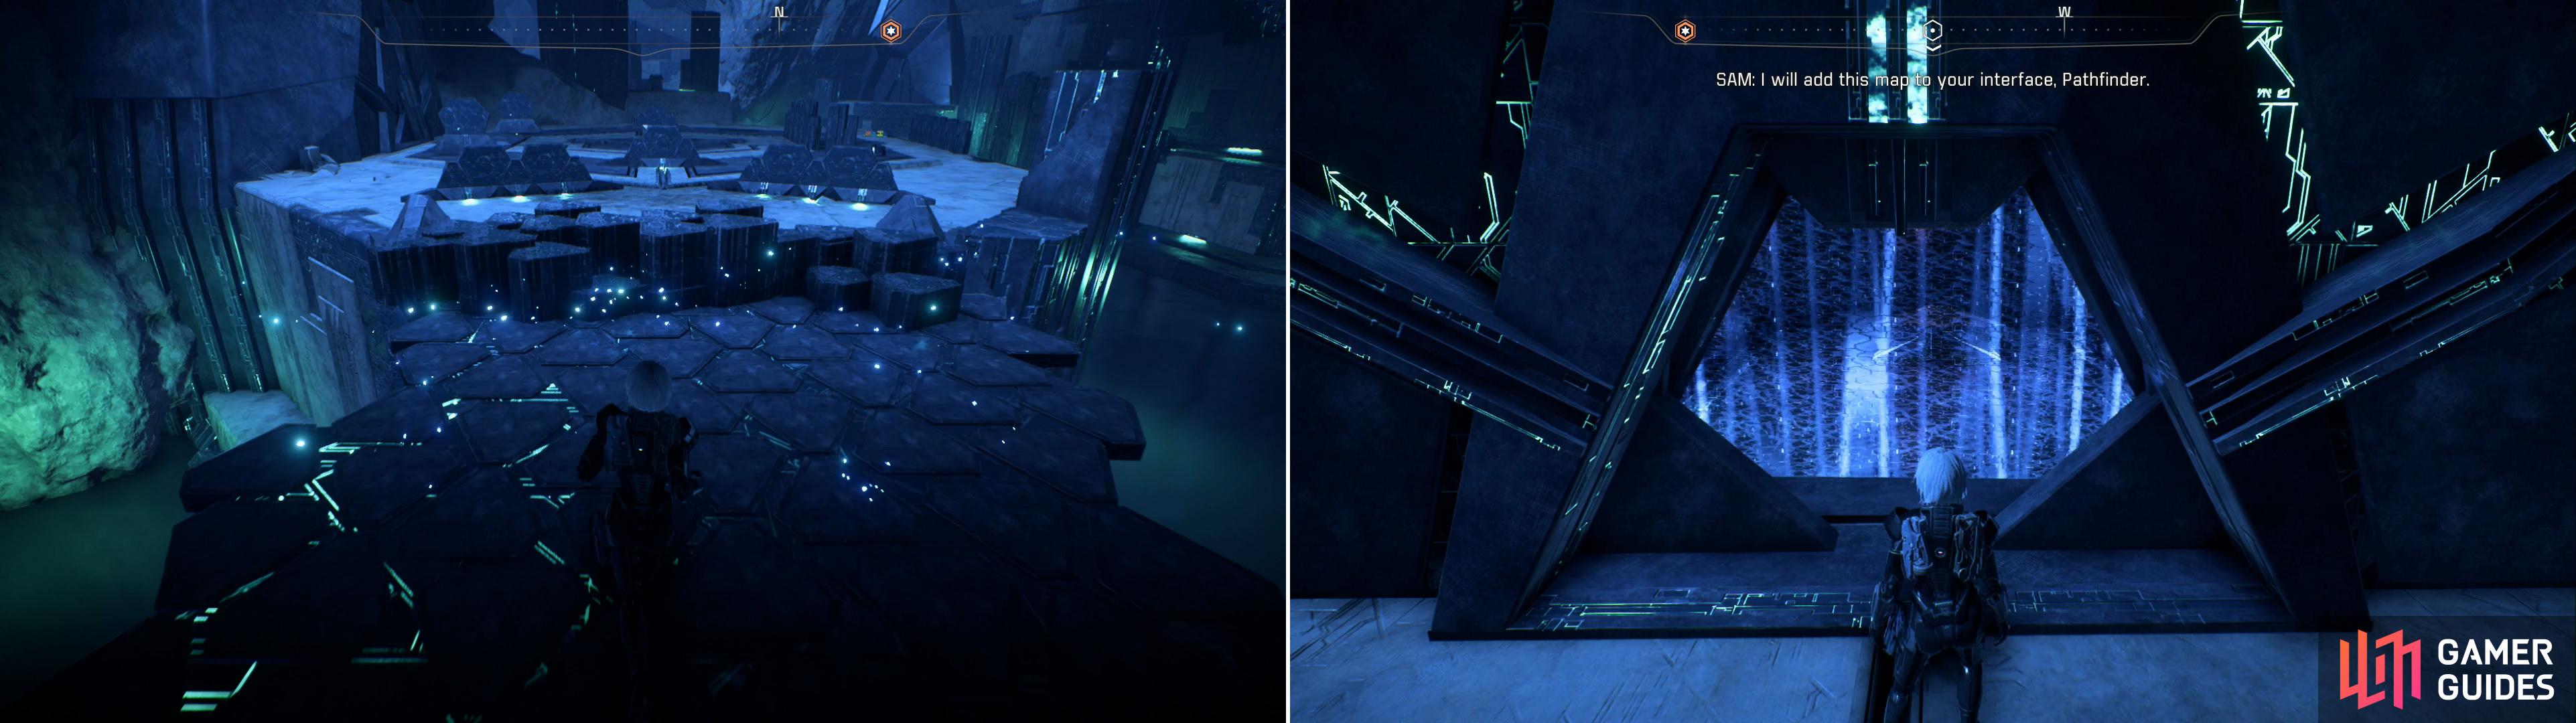 Dont activate the Remnant Console at the entrance to the vault proper, which will allow you to cross a Remnant bridge (left). Note the chamber behind the energy barrier, which is worth planning to return to as you flee the vault (right).